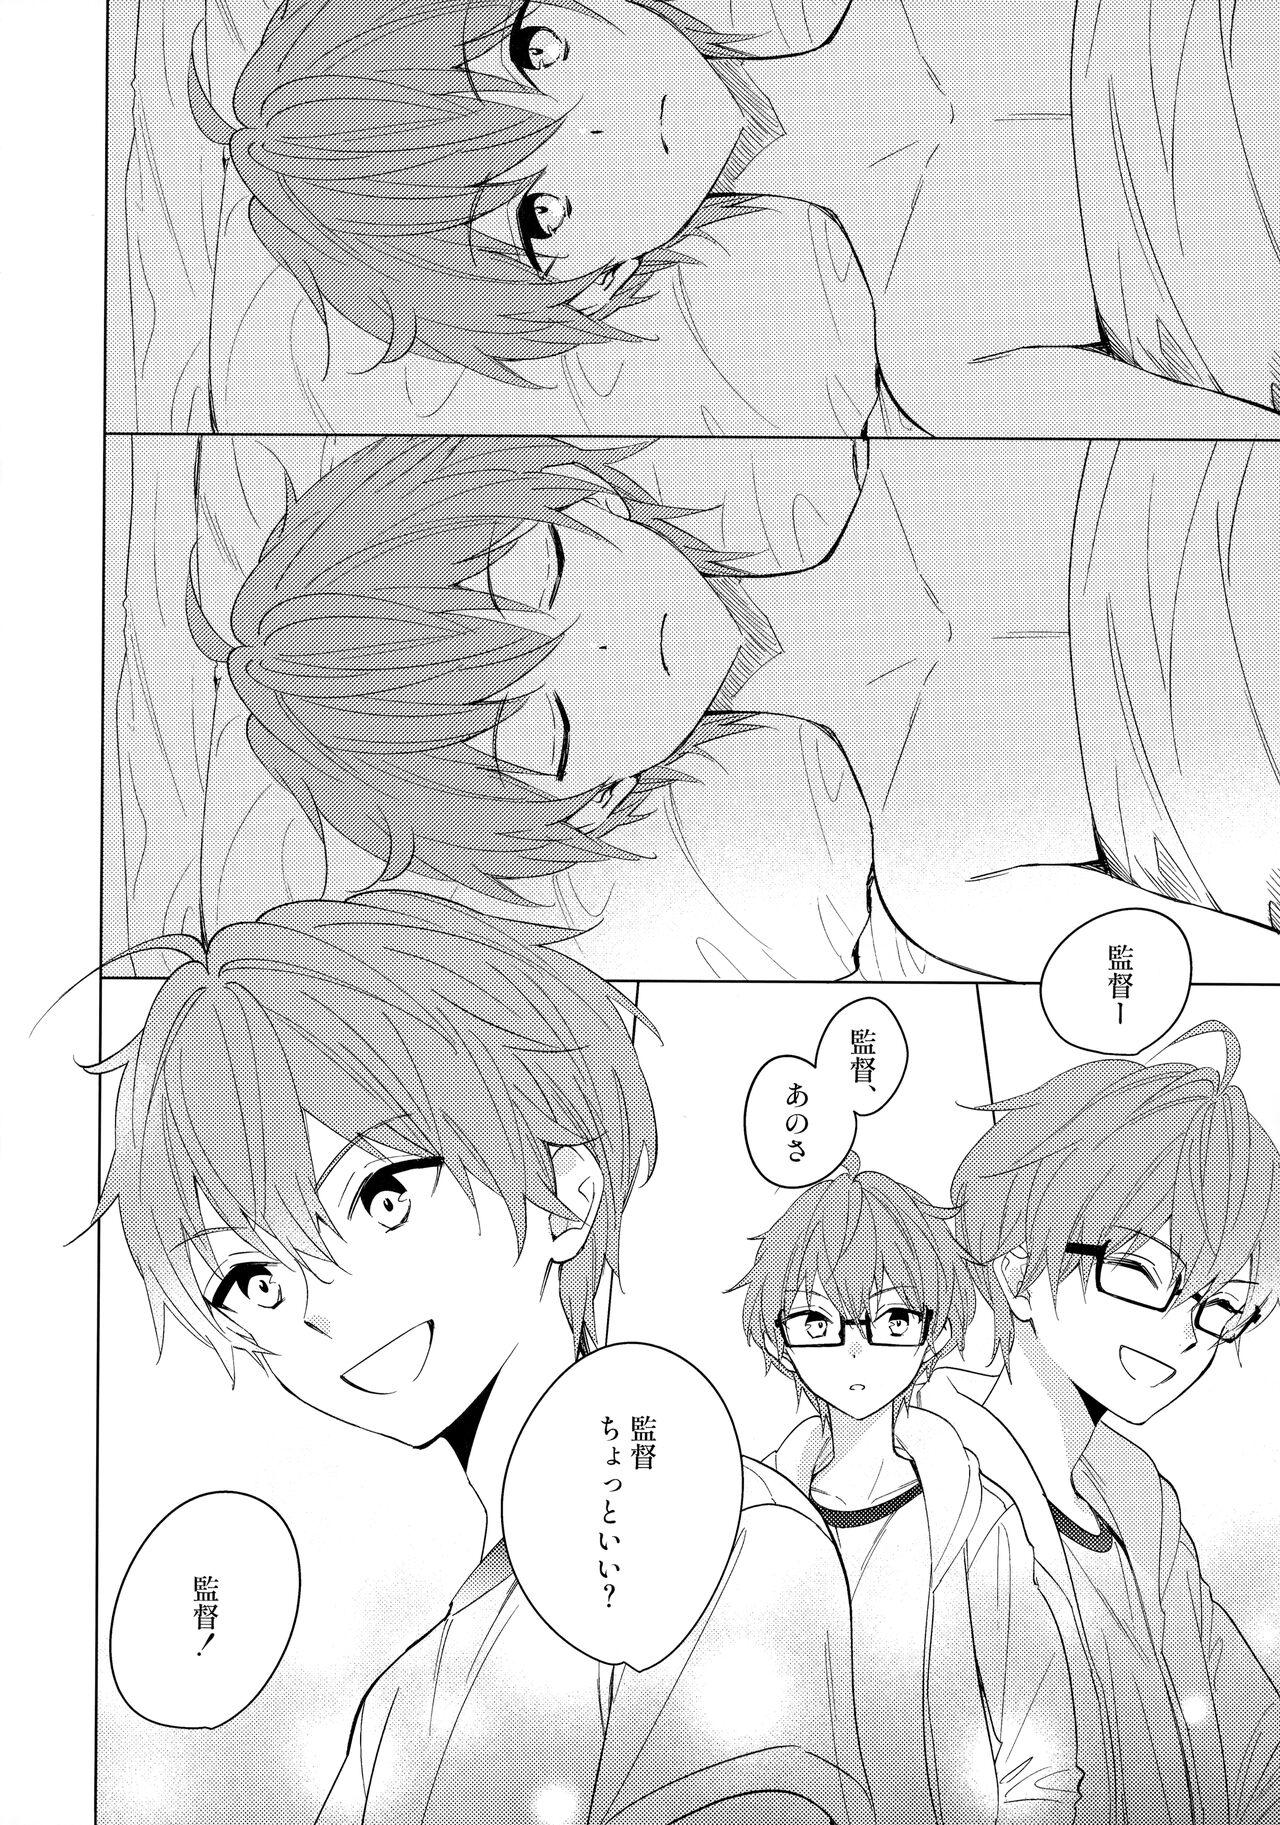 Lesbos june, lemon, and you - The idolmaster sidem Prostitute - Page 5